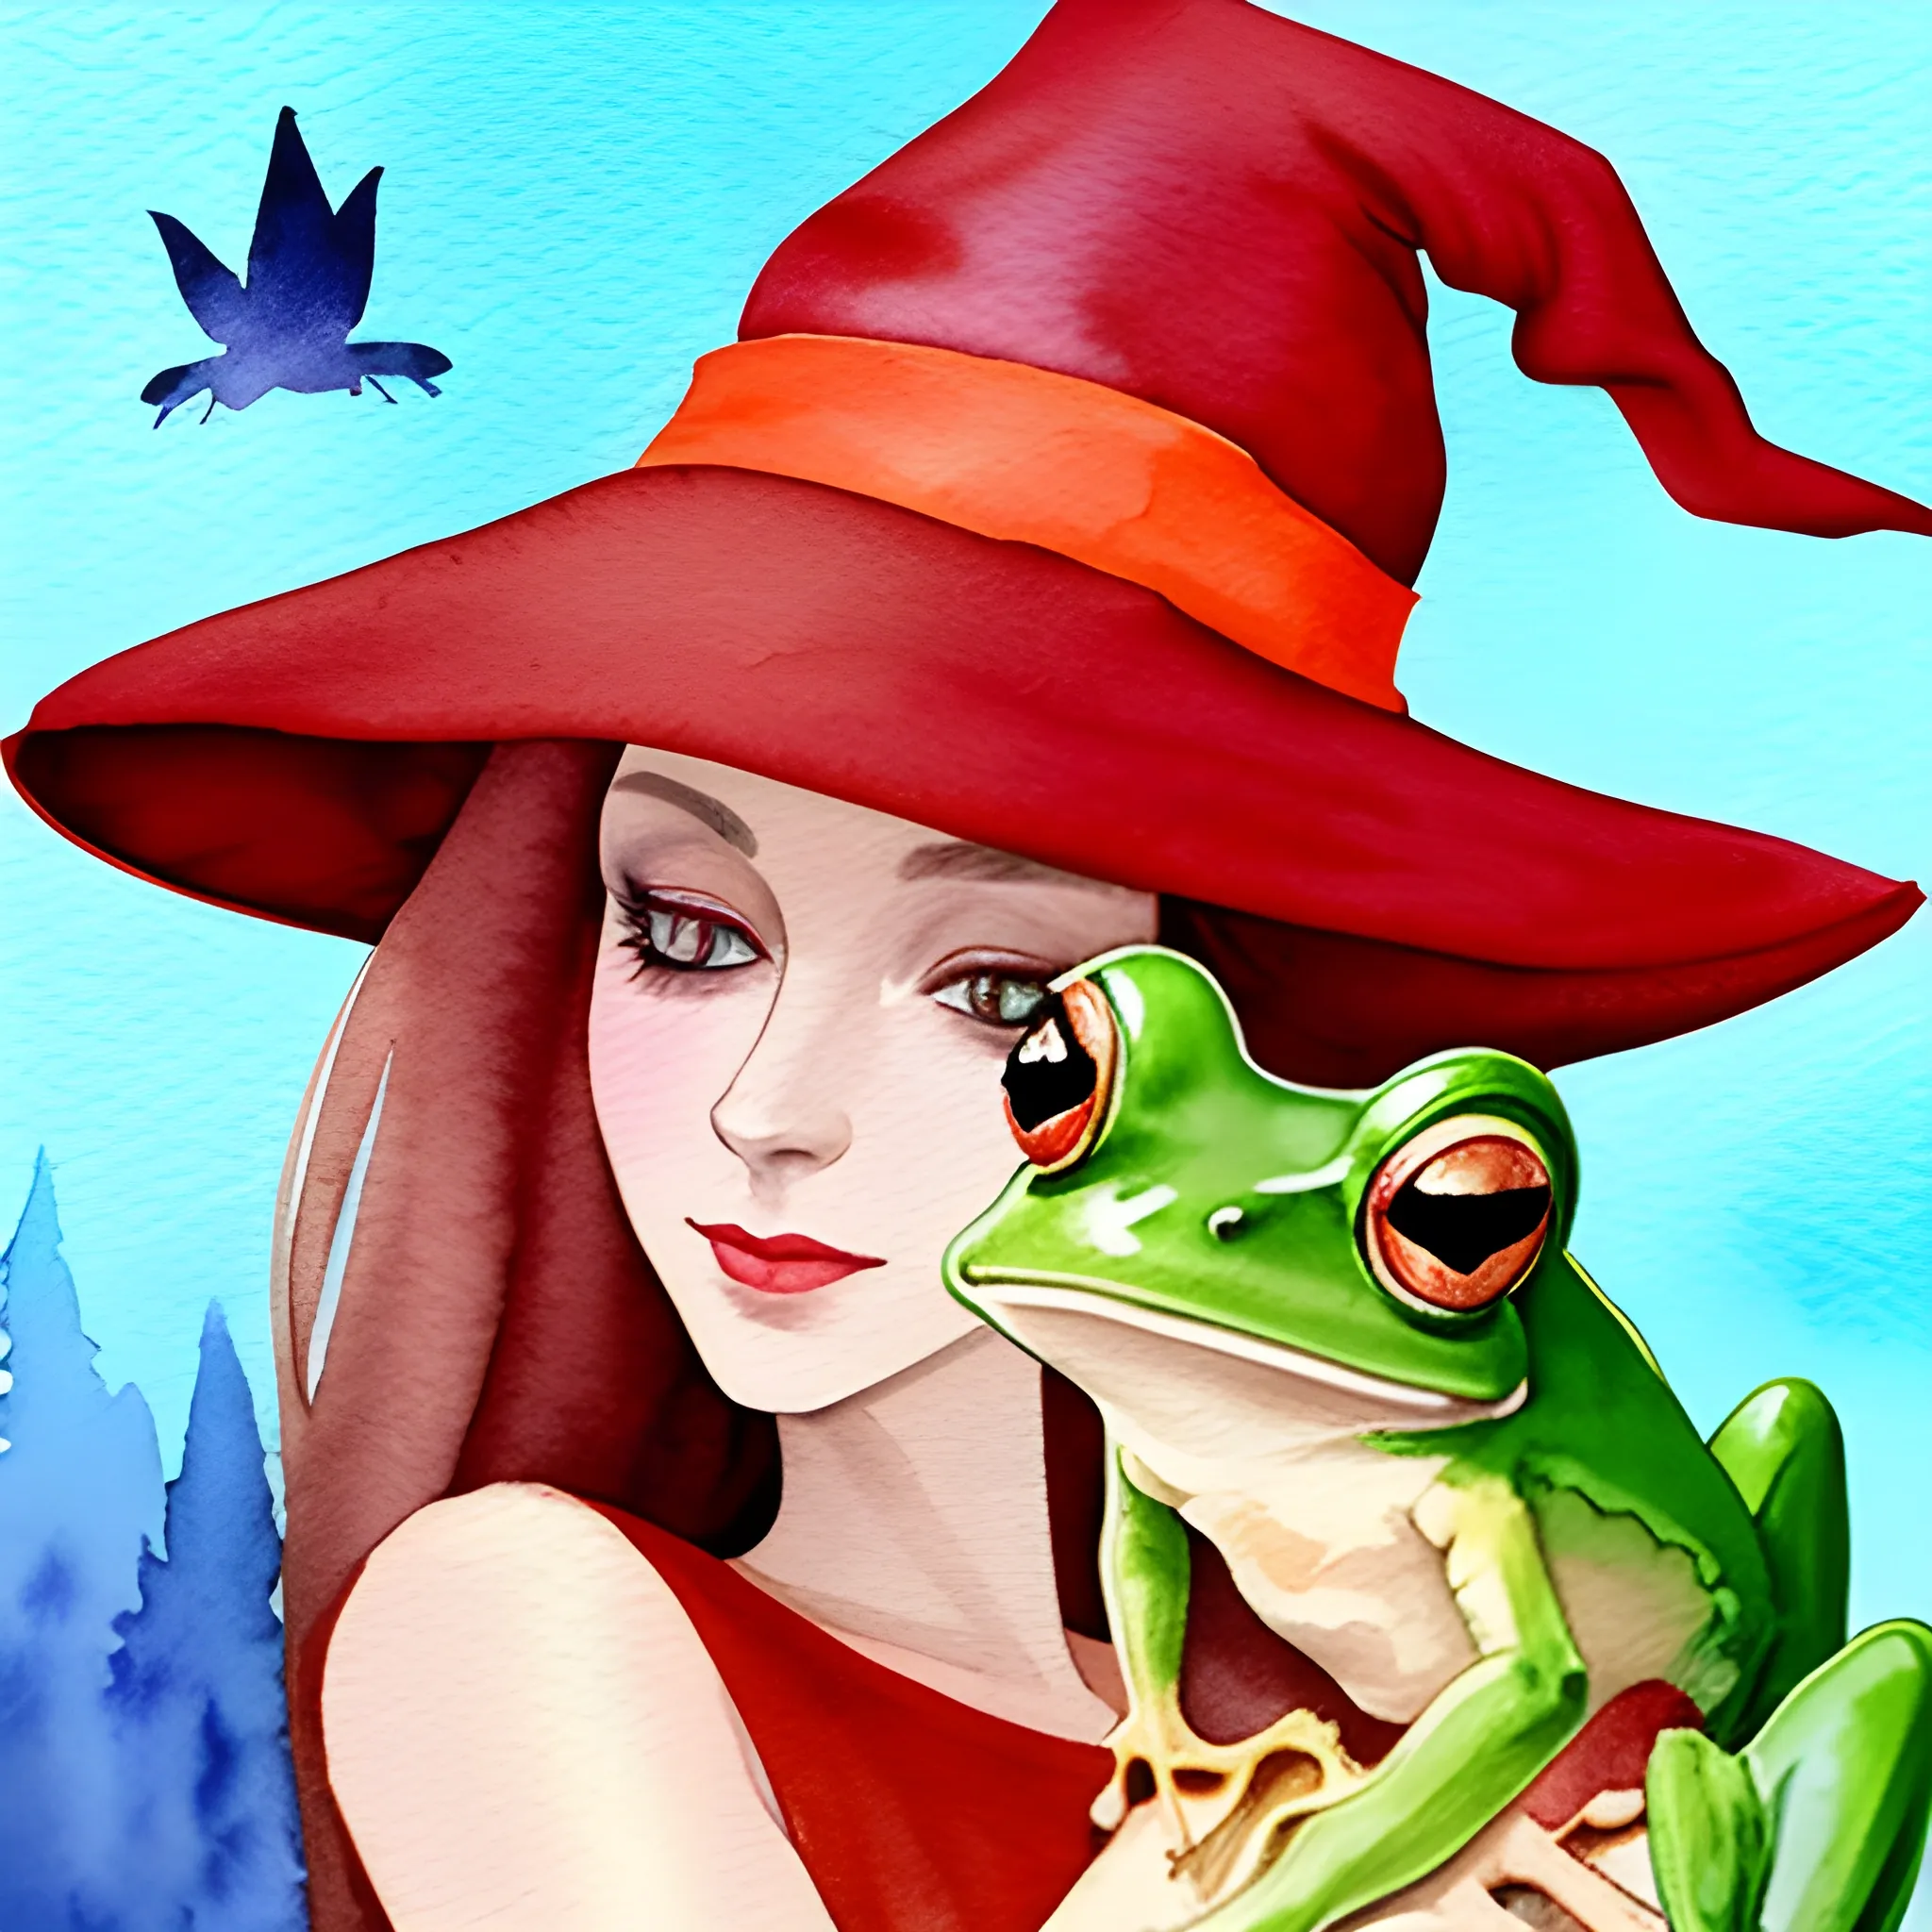 Create a watercolor illustration using only the color red. Depict a woman wearing a witch's hat with a dreamy gaze, seen from a 3/4 angle, as she holds a frog, hinting at the possibility of transforming it into a prince